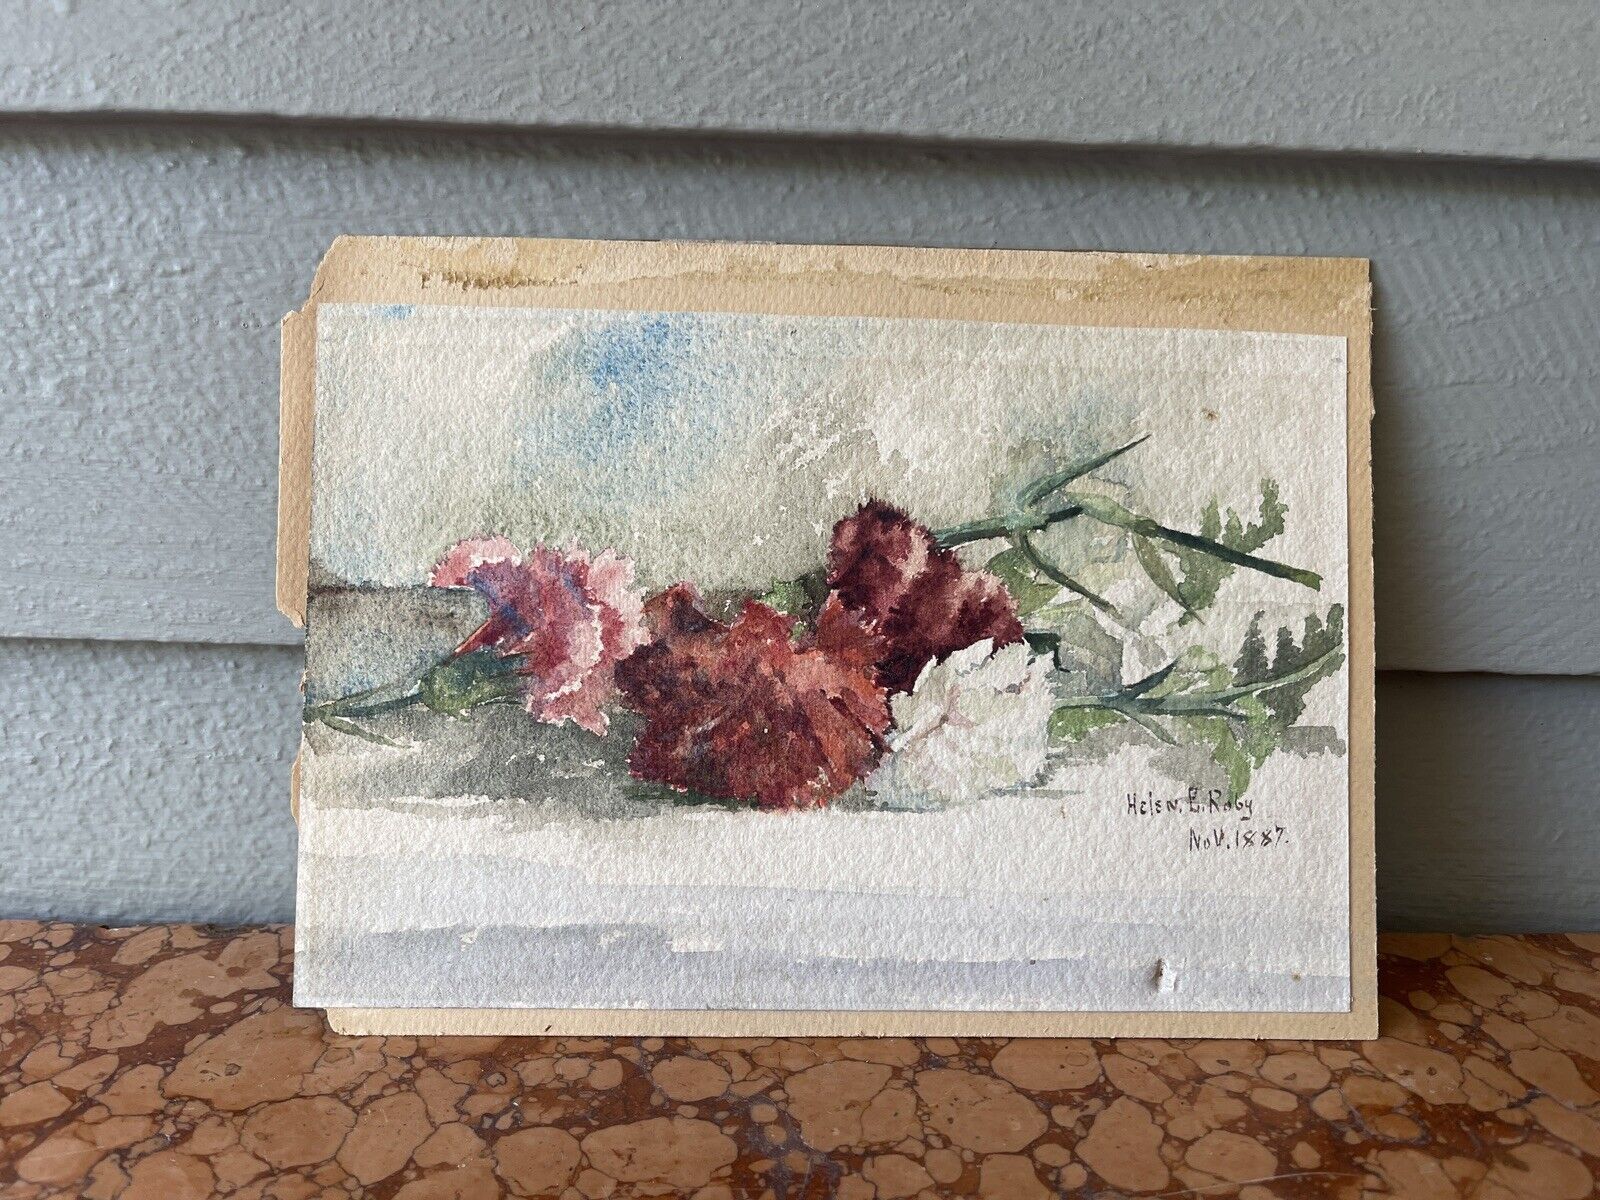 ANTIQUE WATERCOLOR PINK & RED CARNATIONS SIGNED HELEN E ROBY 1887 LISTED ARTIST